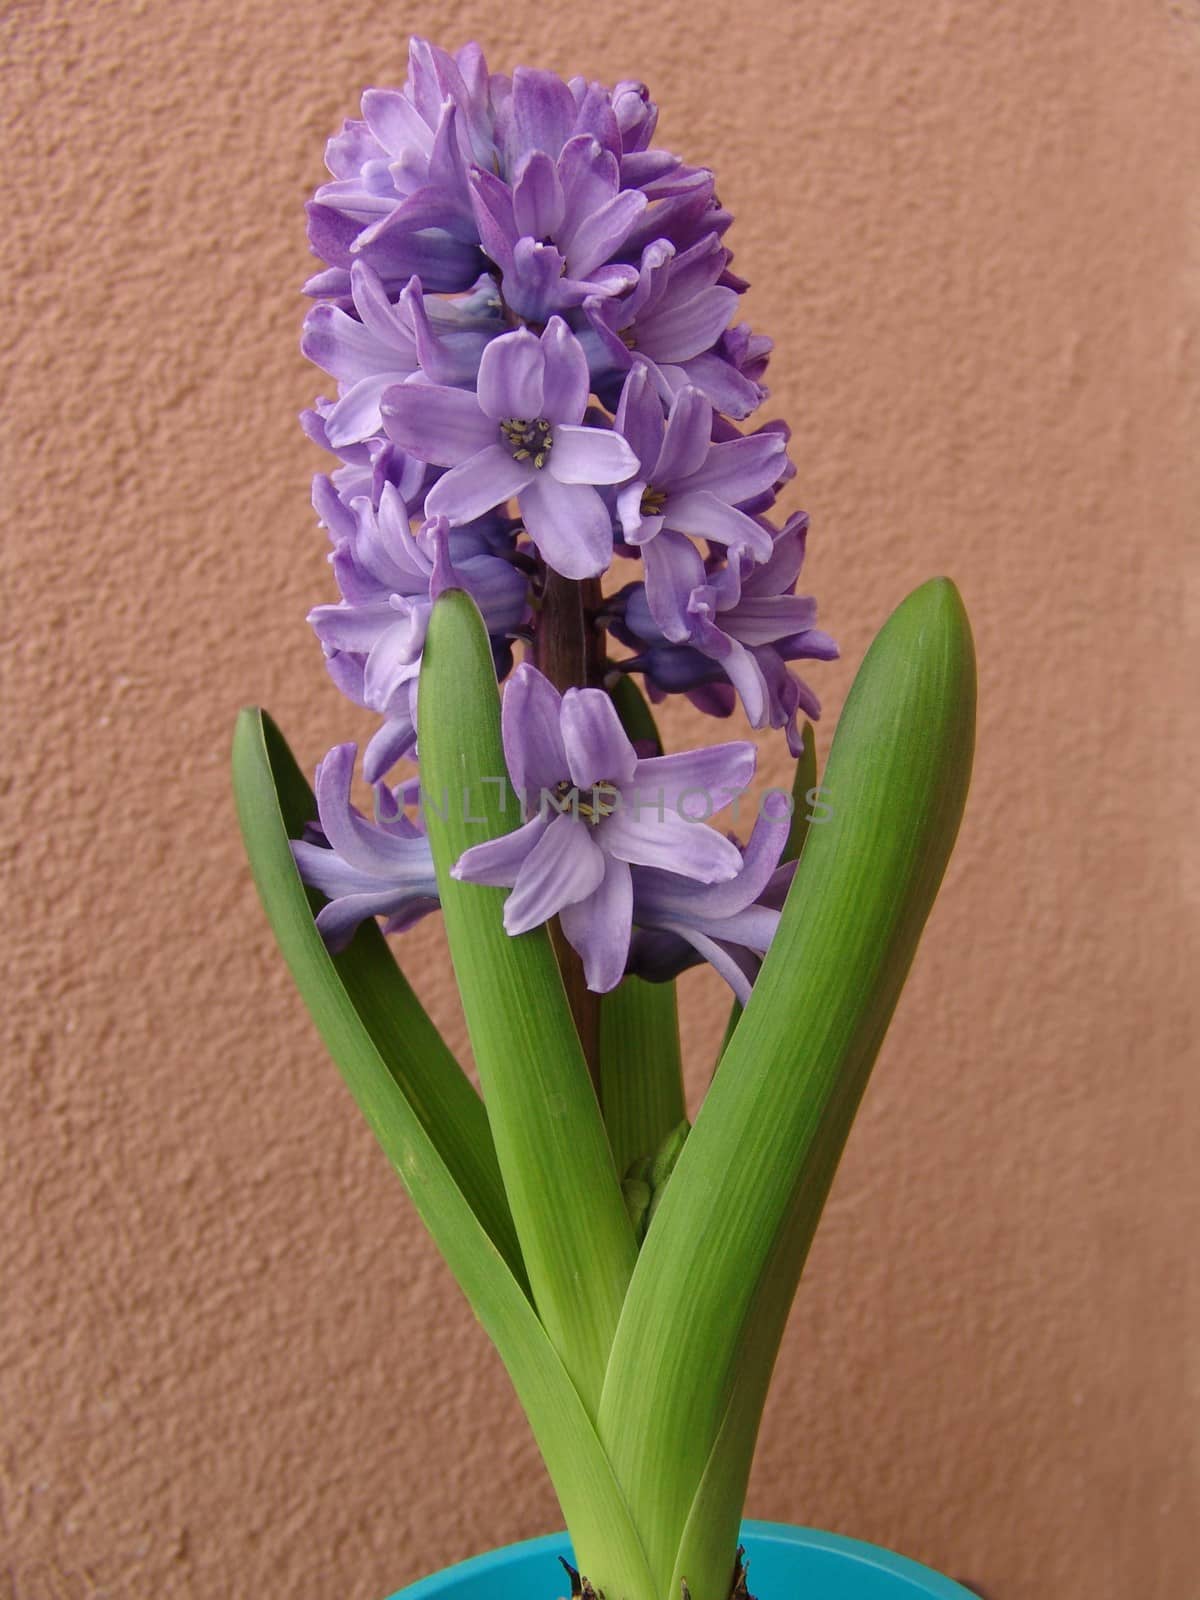 Flower hyacinth Hyacinth. Hyacinths bloom in early spring are bright and very fragrant flowers. by elena_vz